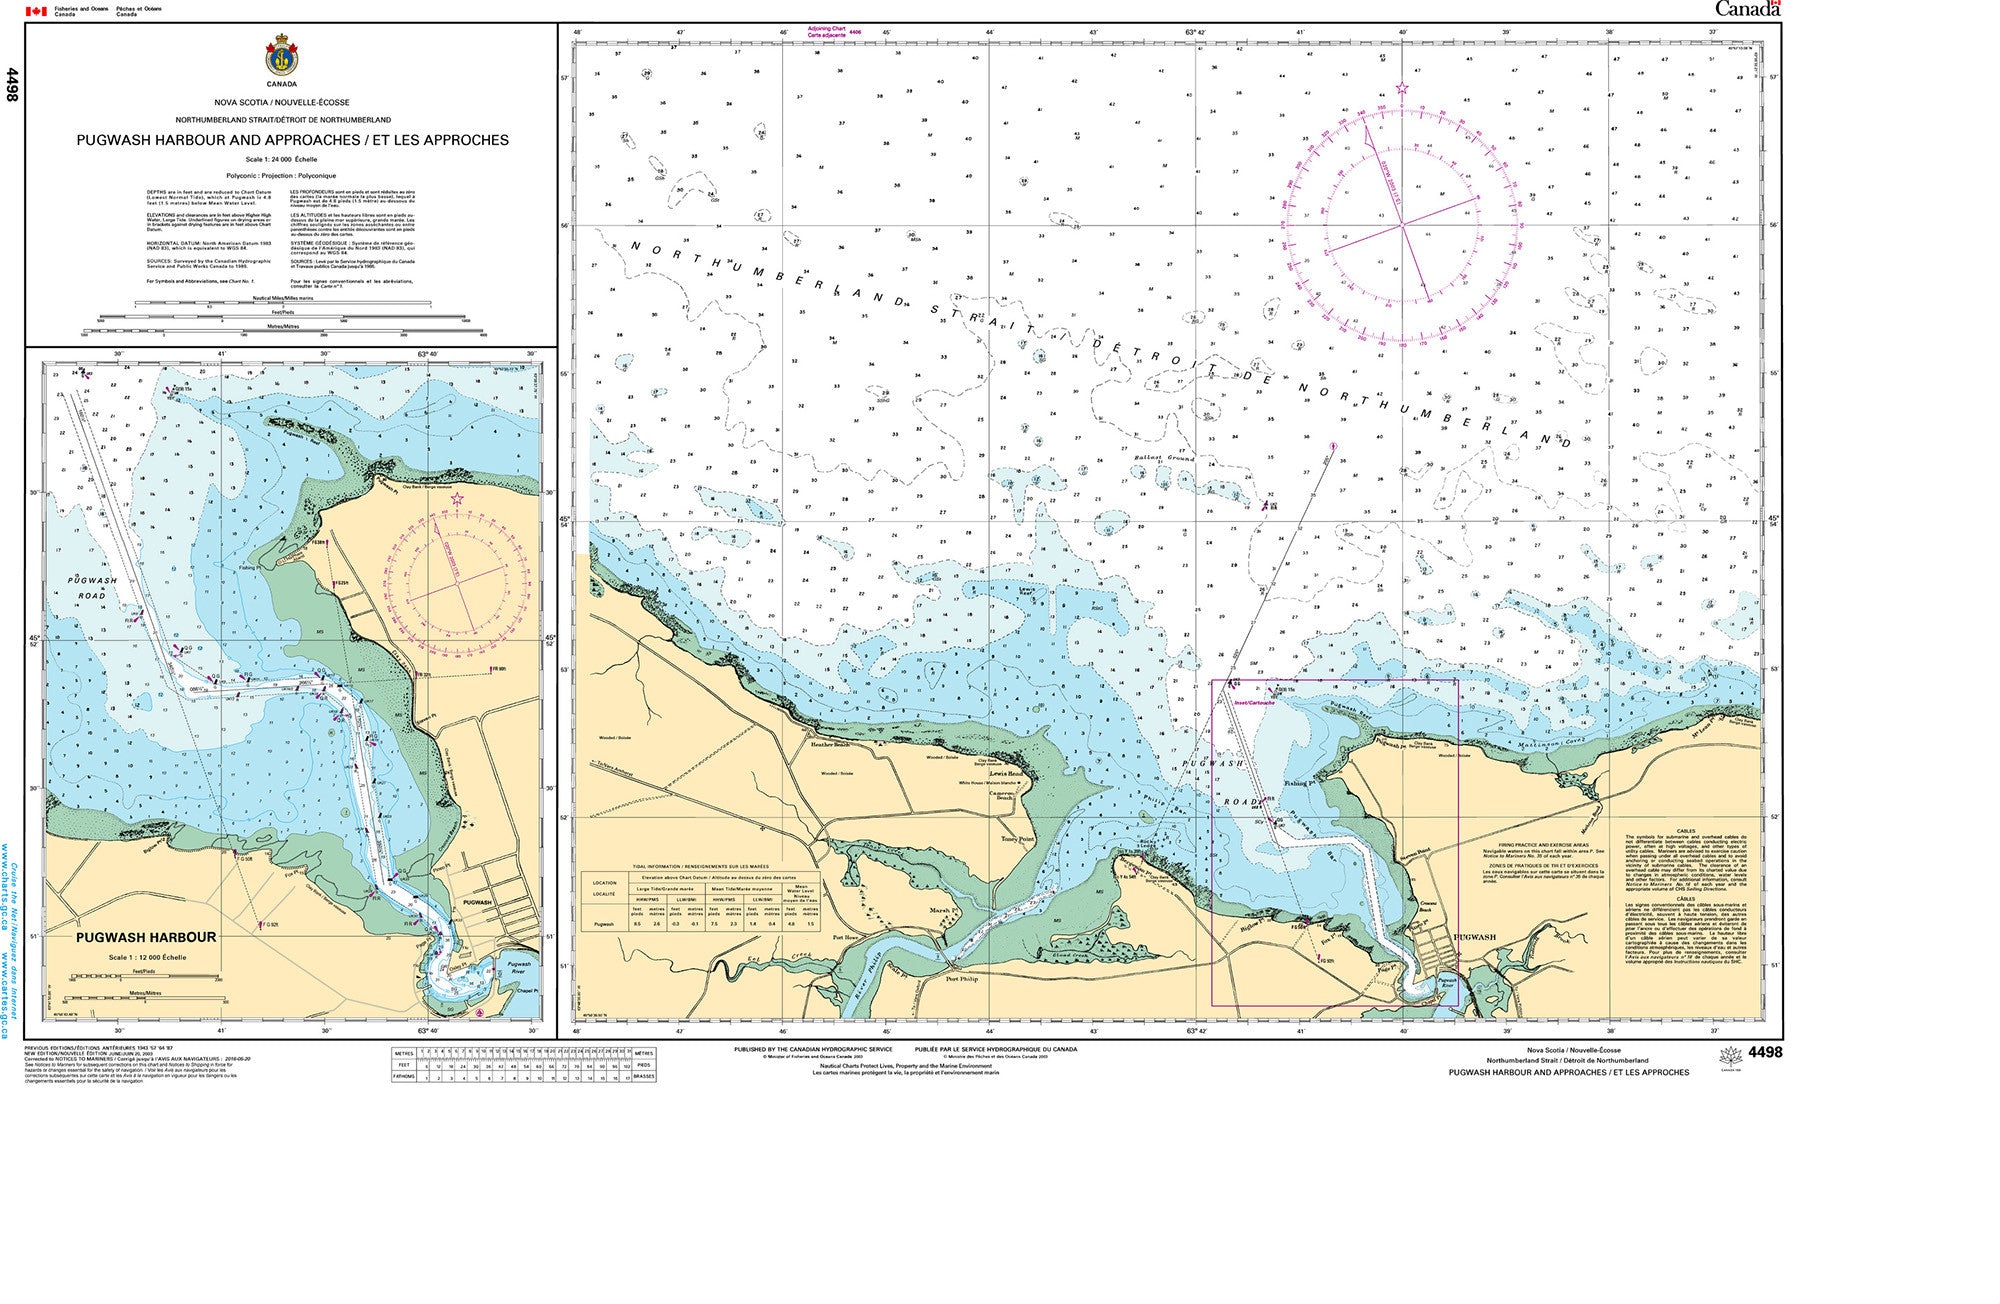 Canadian Hydrographic Service Nautical Chart CHS4498: Pugwash Harbour and approaches/et les approches